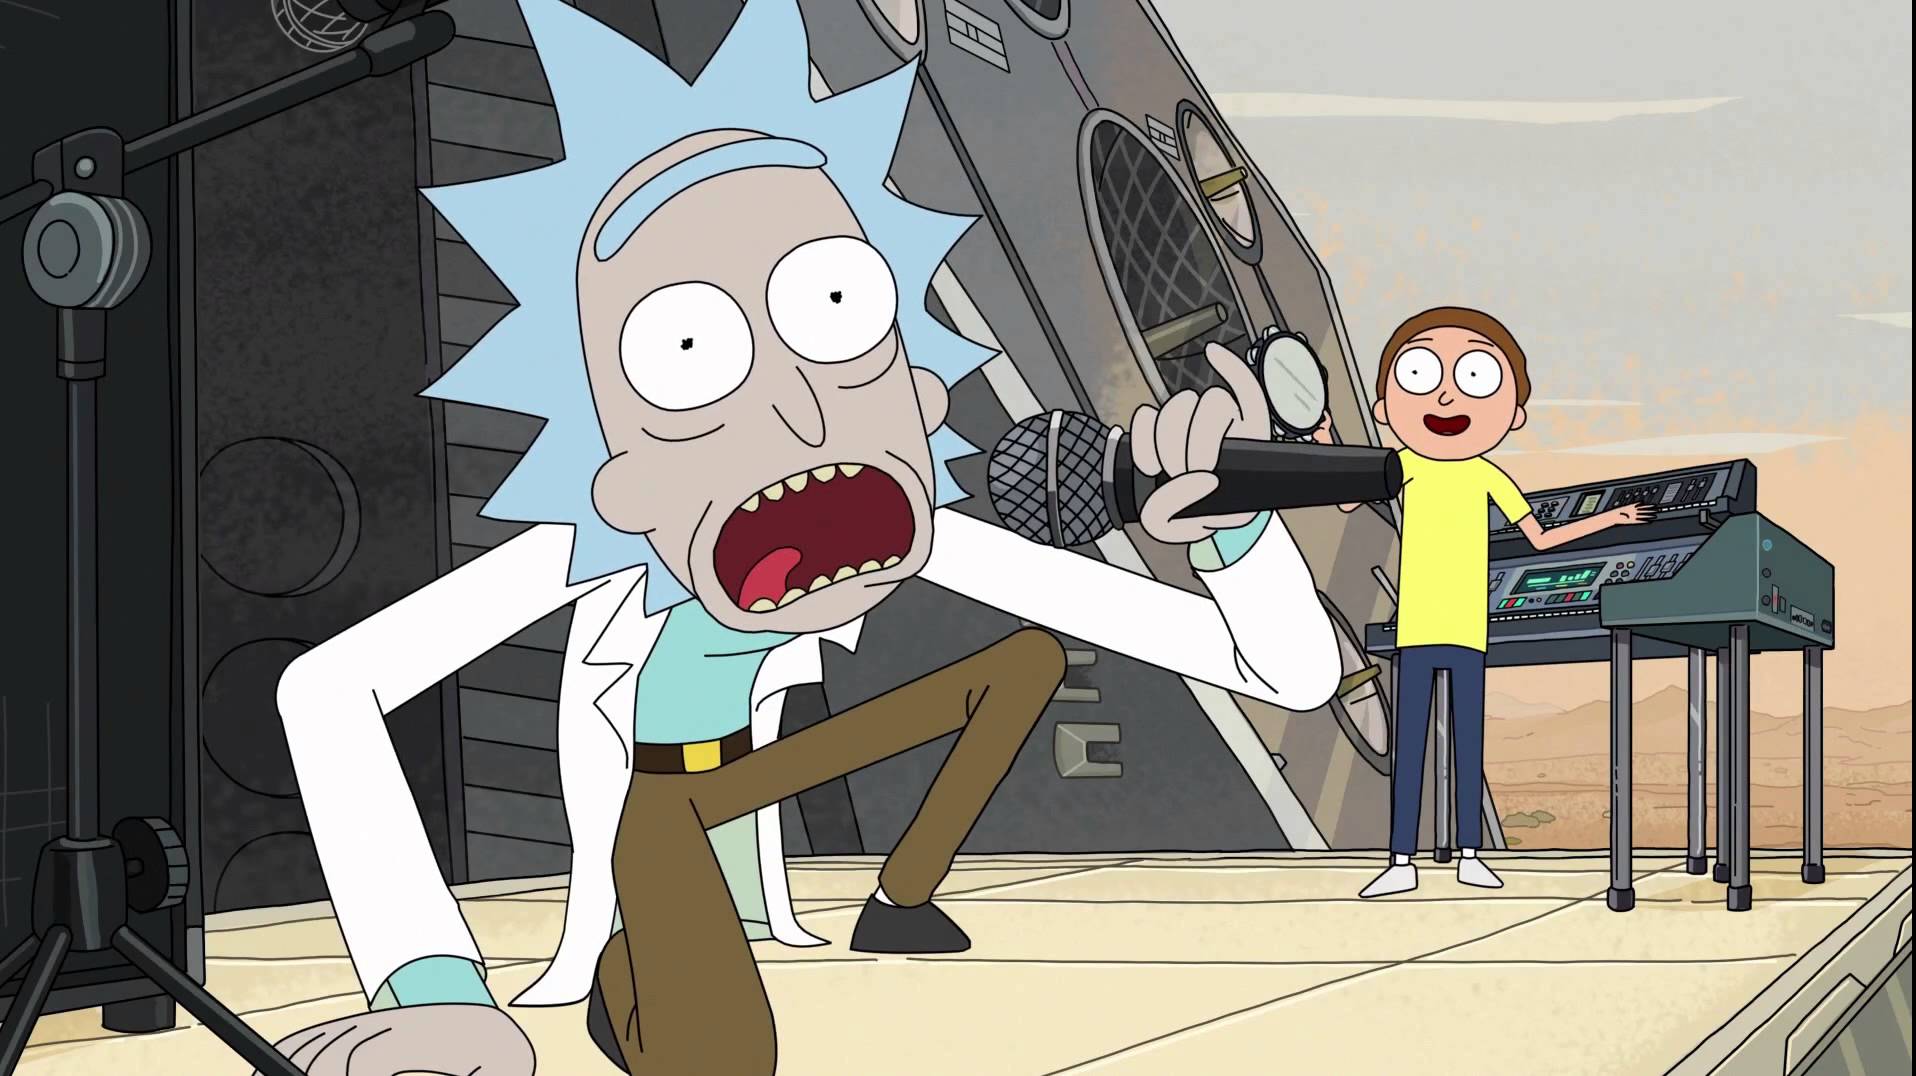 rick and morty apparently love logic and theyre super hyped for his new mixtape